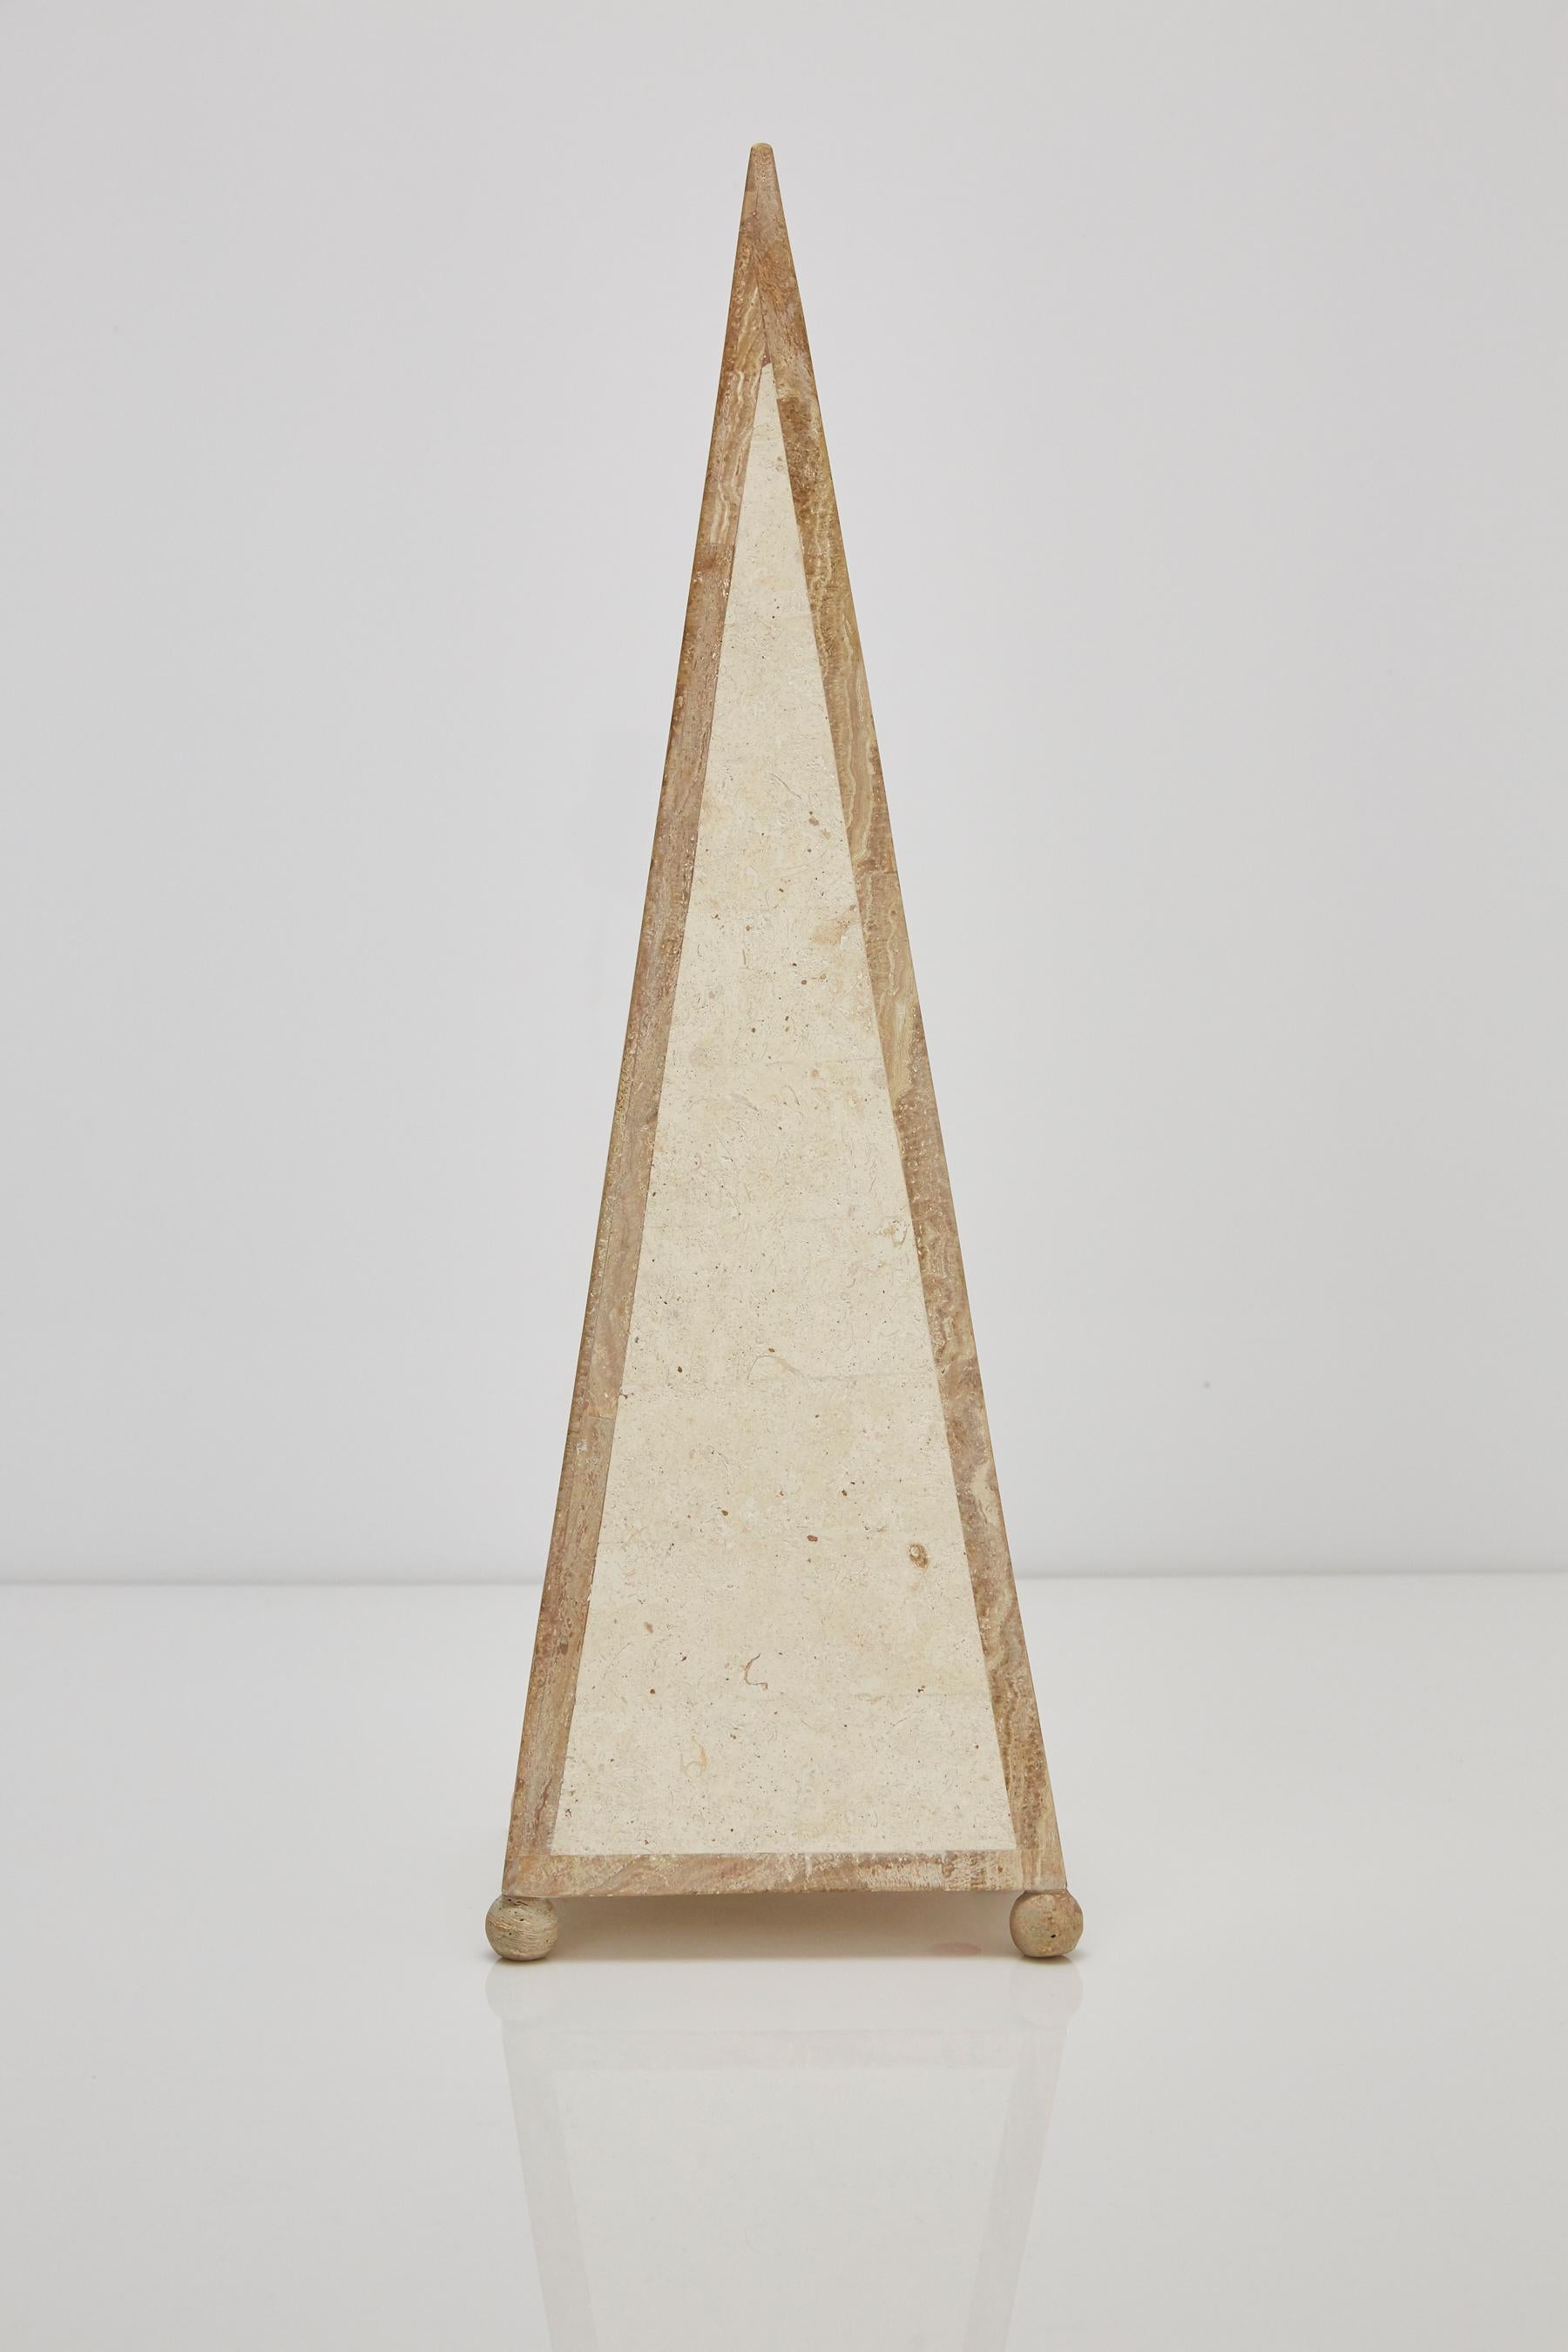 25 inches tall decorative pyramid in tessellated Mactan stone with wood stone trim.

Coordinates with items LU1484211449901 and LU1484211449891 for a set of three.

All furnishings are made from 100% natural Fossil Stone or Seashell inlay, carefully